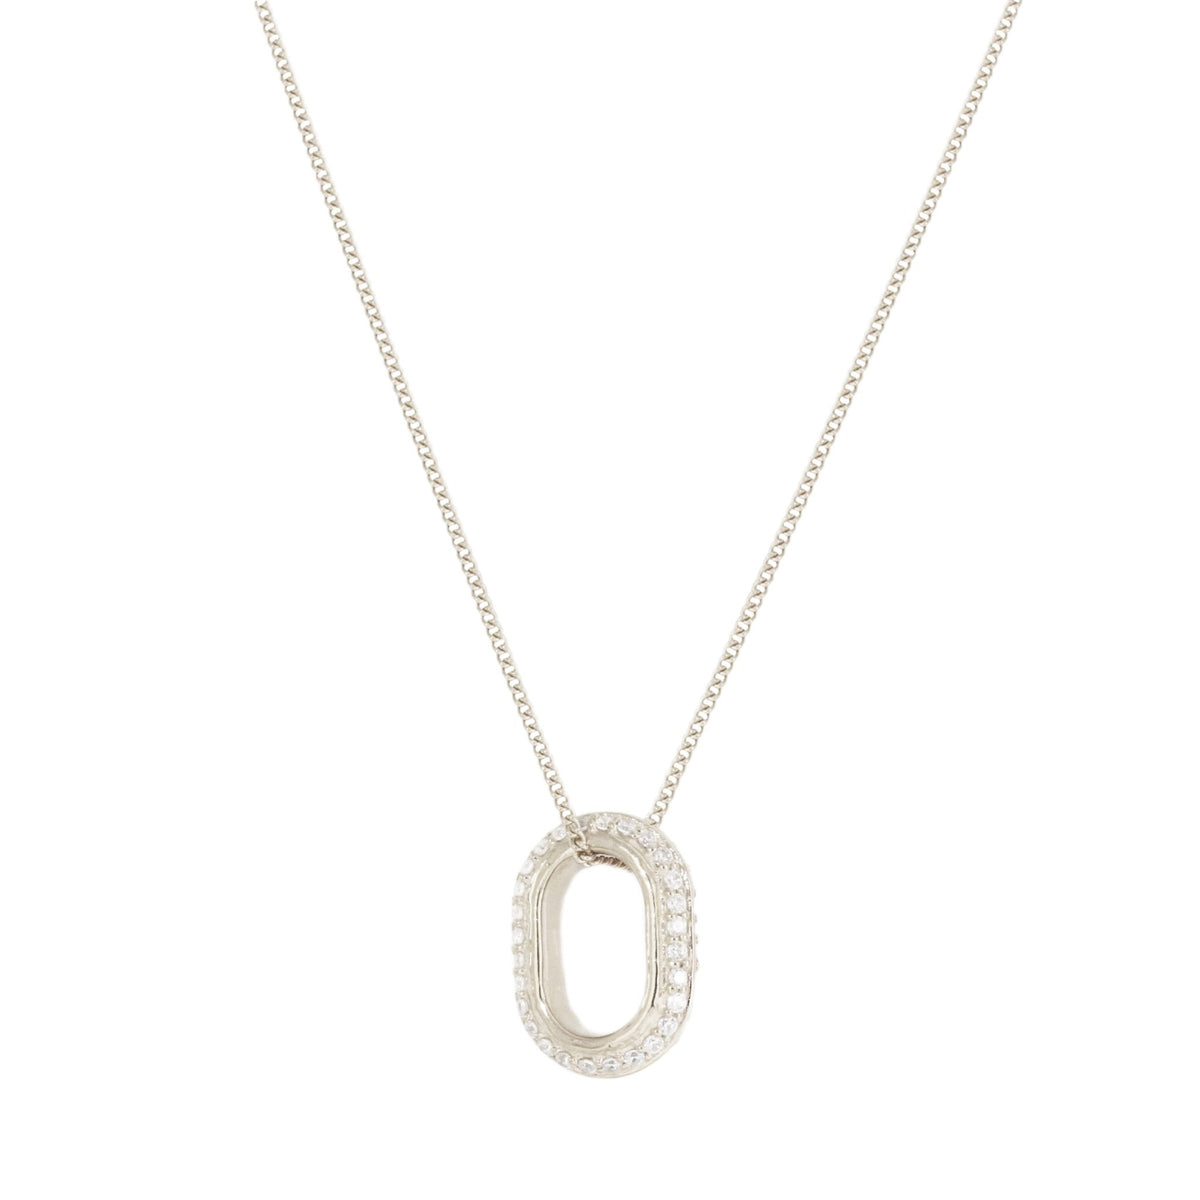 LOVE ETERNITY OVAL PENDANT NECKLACE - CUBIC ZIRCONIA &amp; SILVER - SO PRETTY CARA COTTER